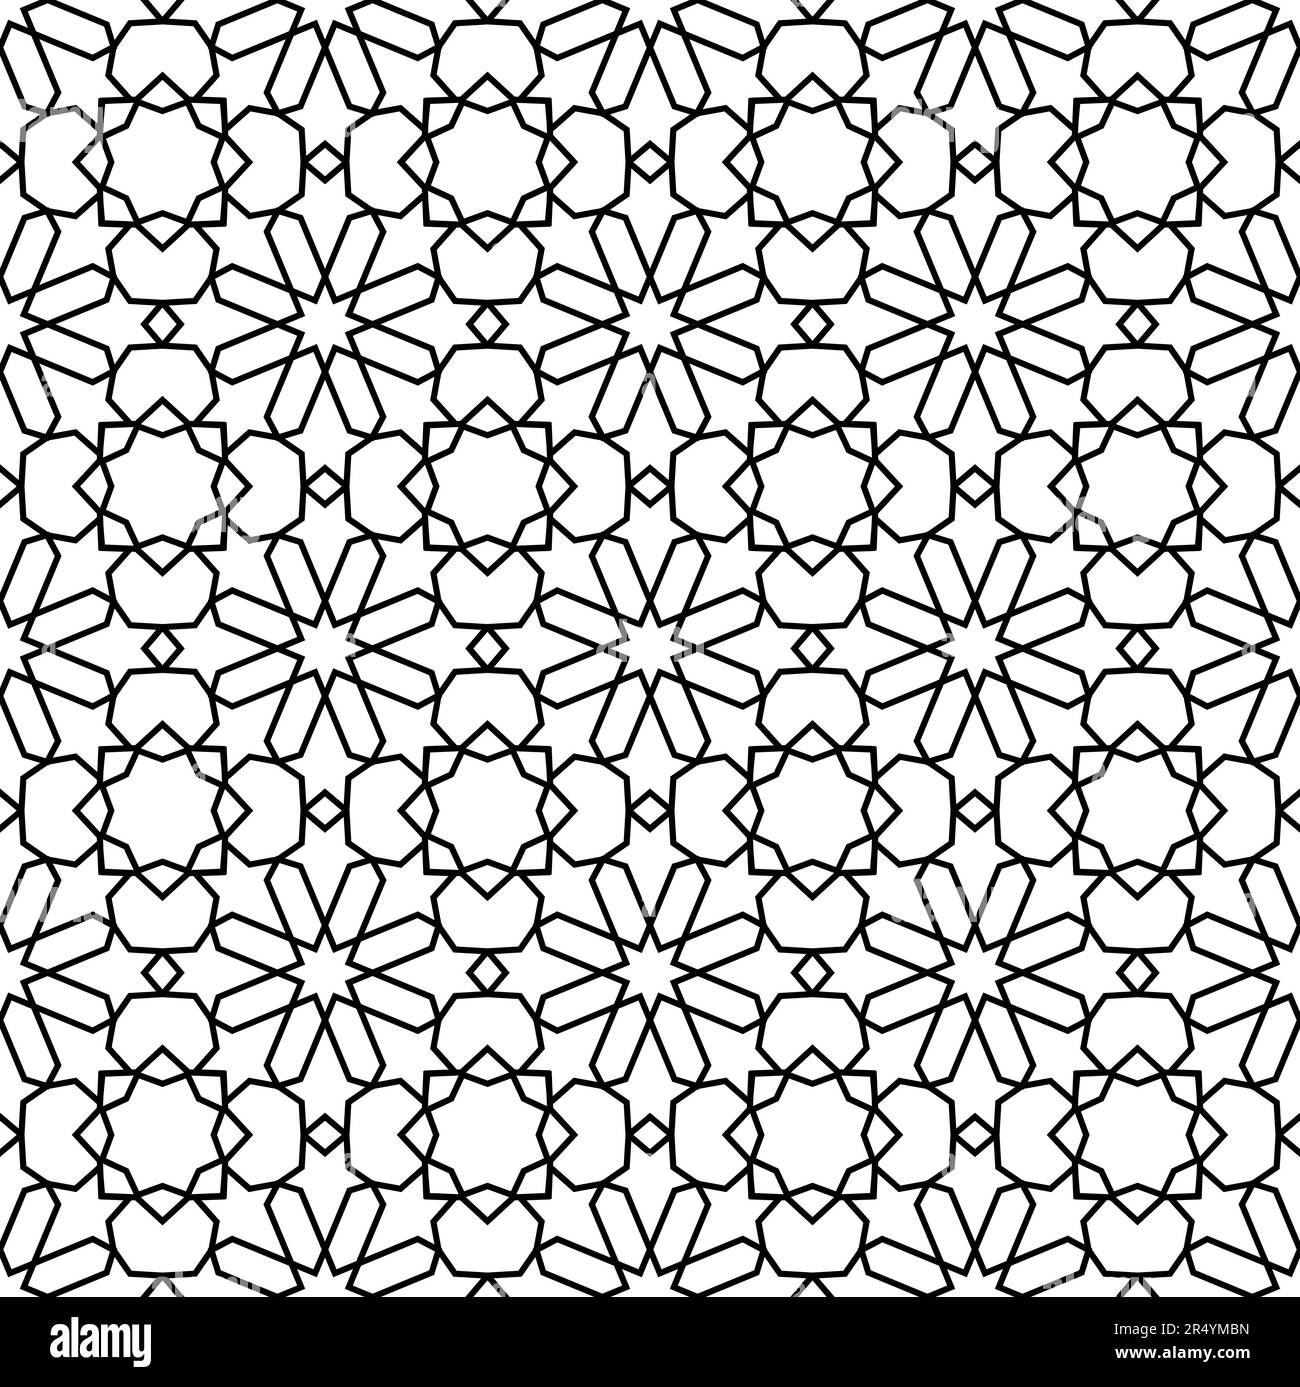 Mashrabiya arabesque arabic pattern. Seamless islamic background with vector islam ornament of abstract geometric shapes, oriental stars and floral elements. Arabian mosaic or tile monochrome motif Stock Vector